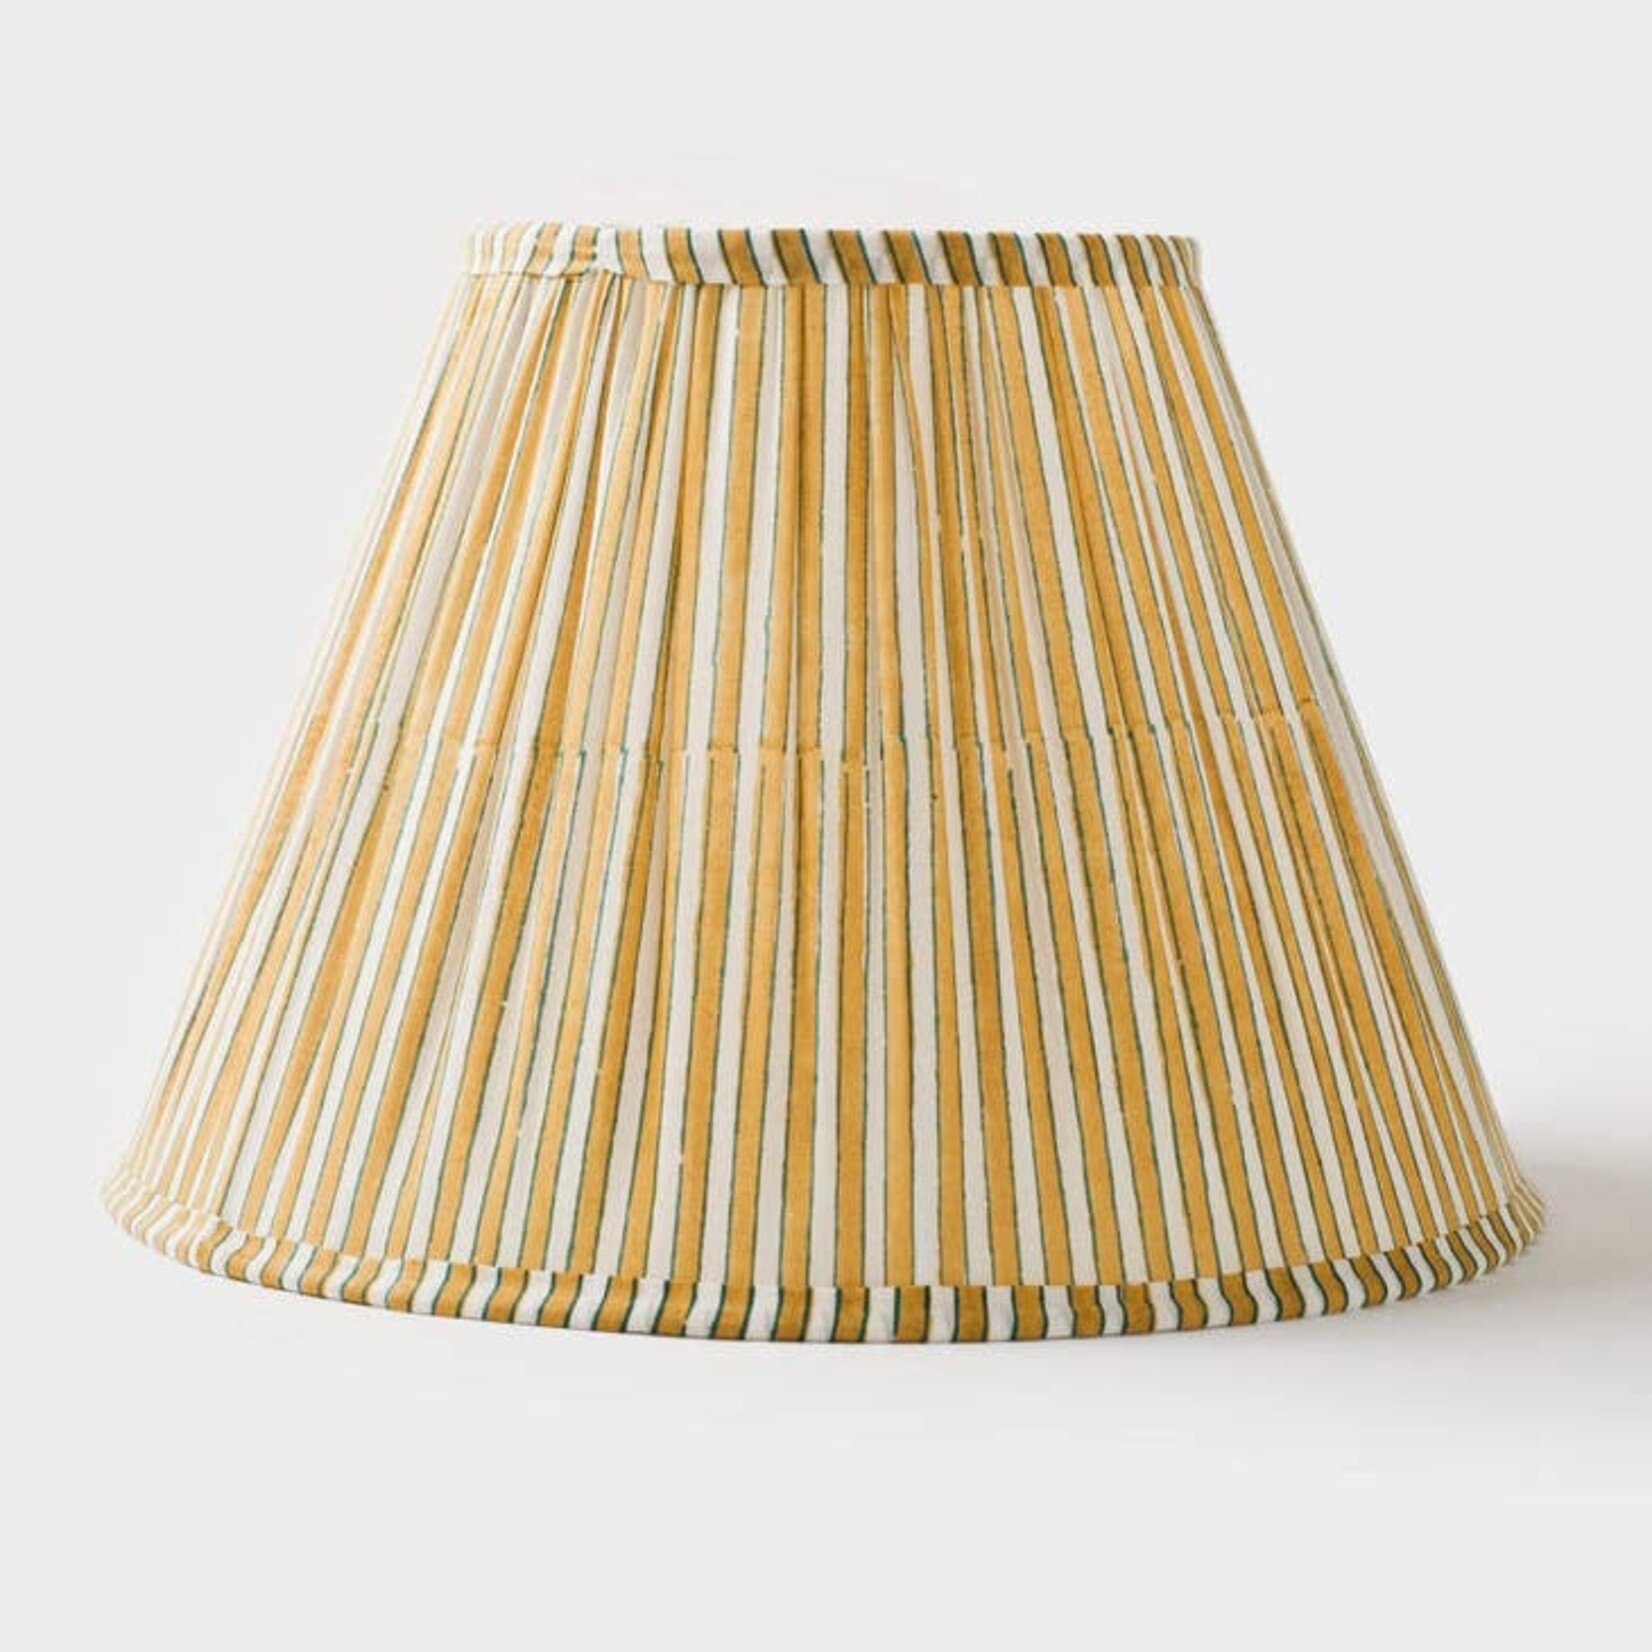 Candy Stripe Gathered Floral Lampshade